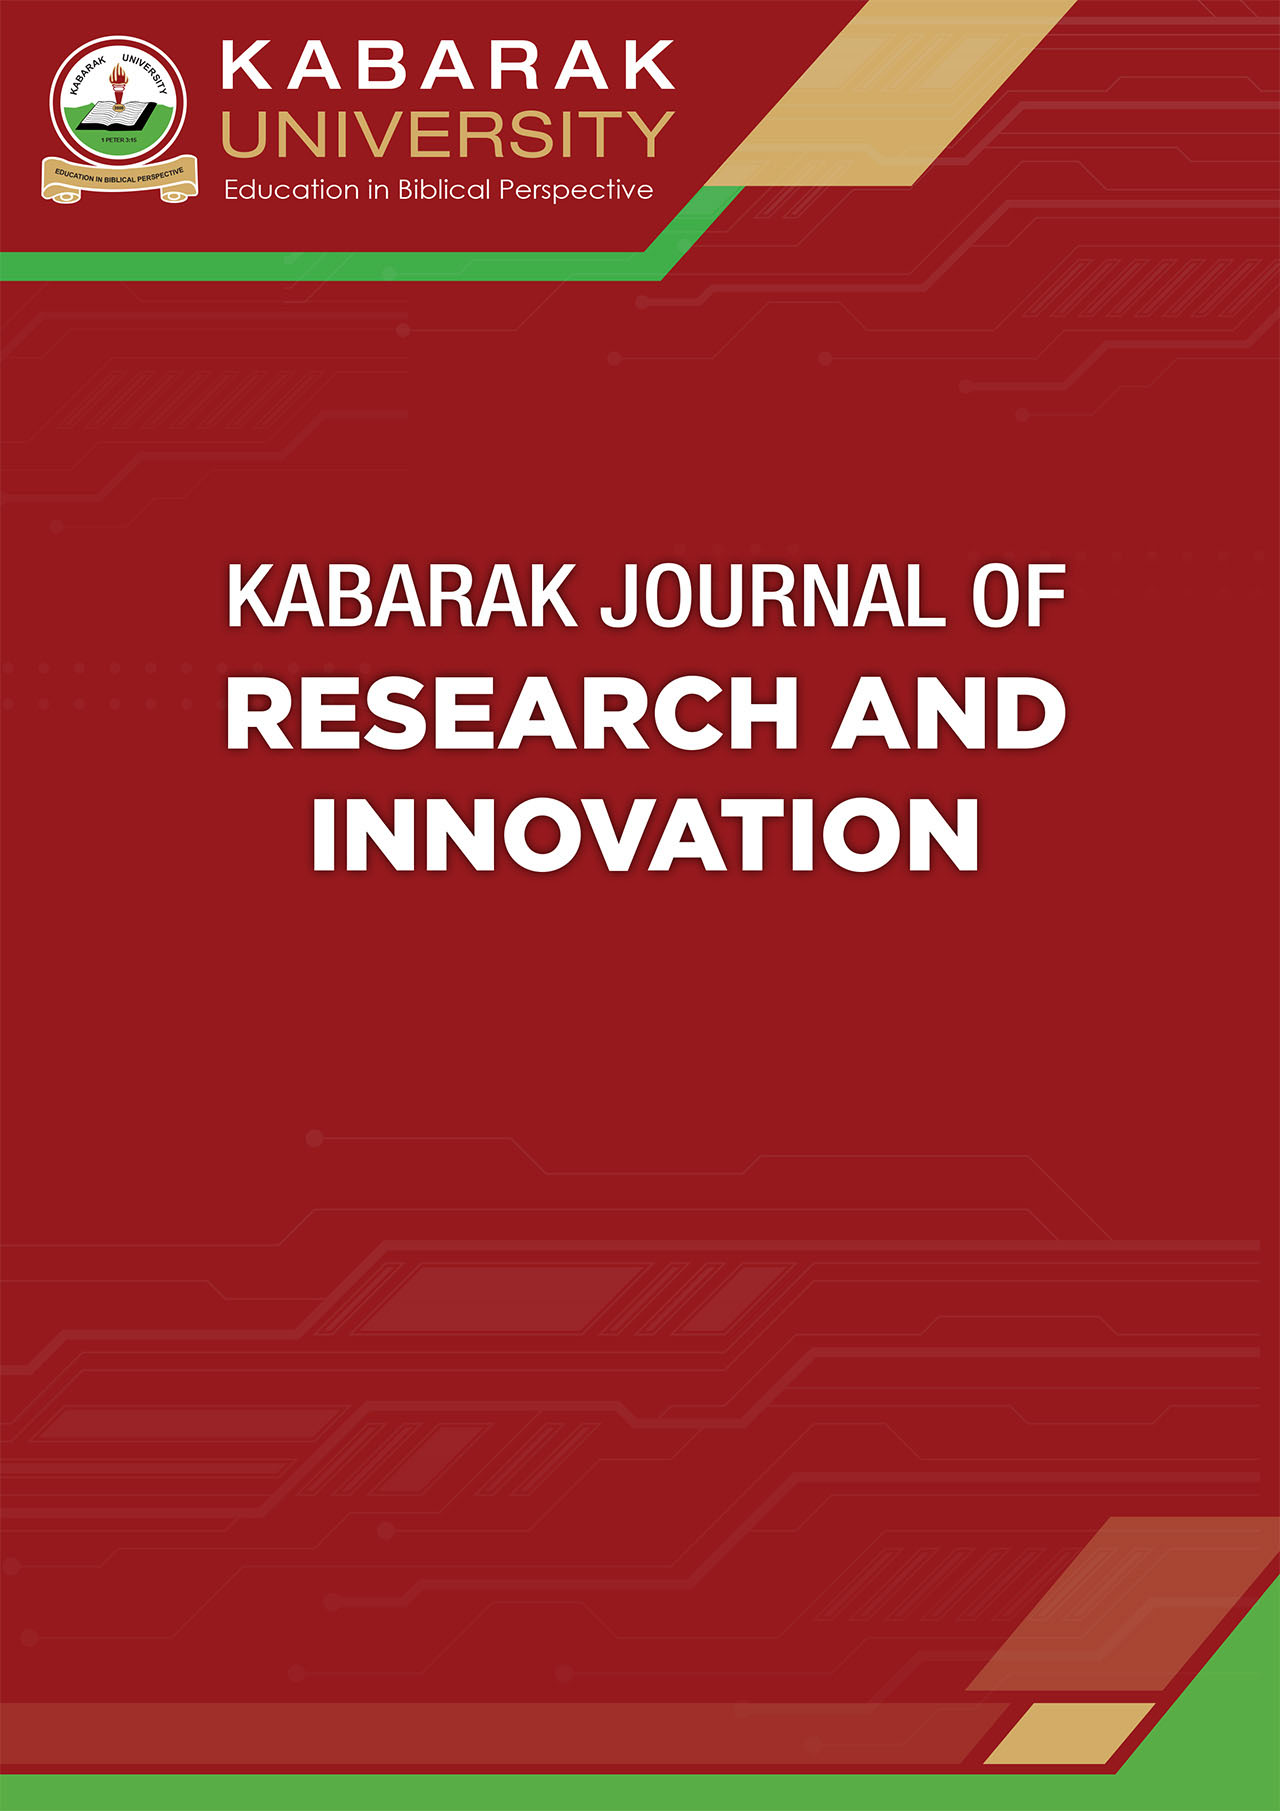 					View Vol. 11 No. 2 (2021): Kabarak Journal of Research and Innovation (KJRI)
				